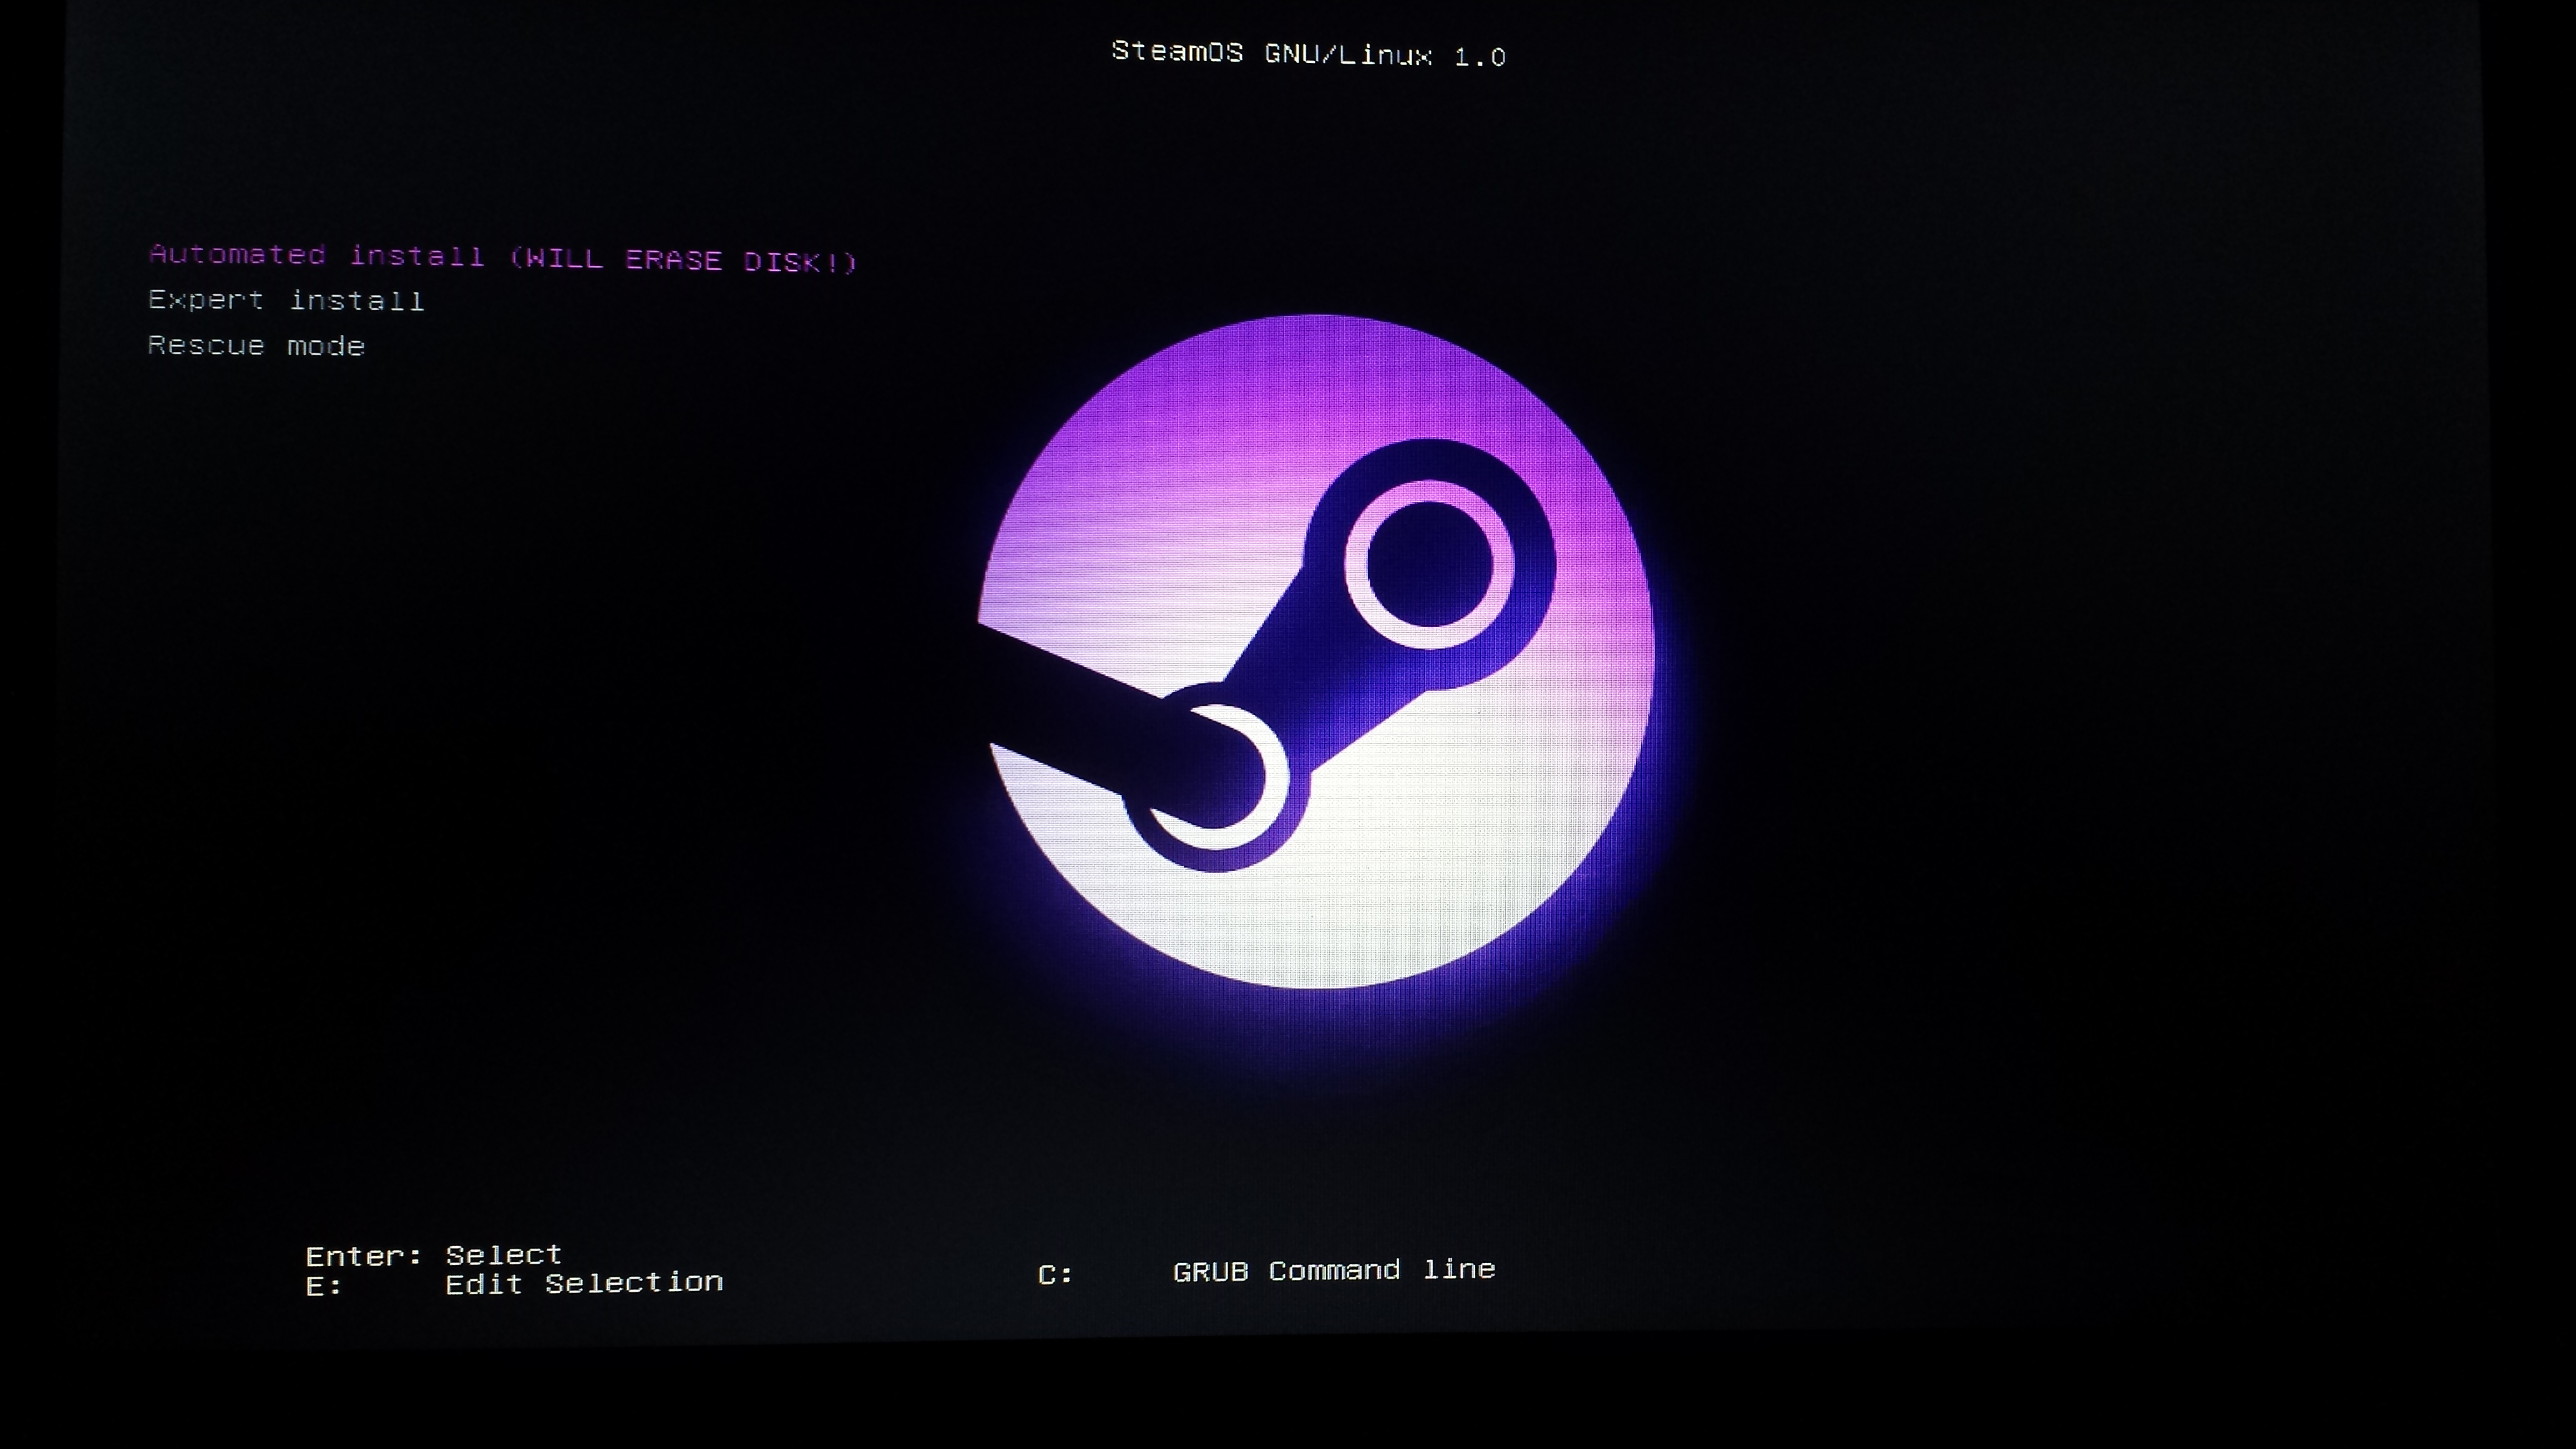 http://i1-news.softpedia-static.com/images/news2/How-to-Install-SteamOS-in-VirtualBox-409363-2.jpg?1387183569